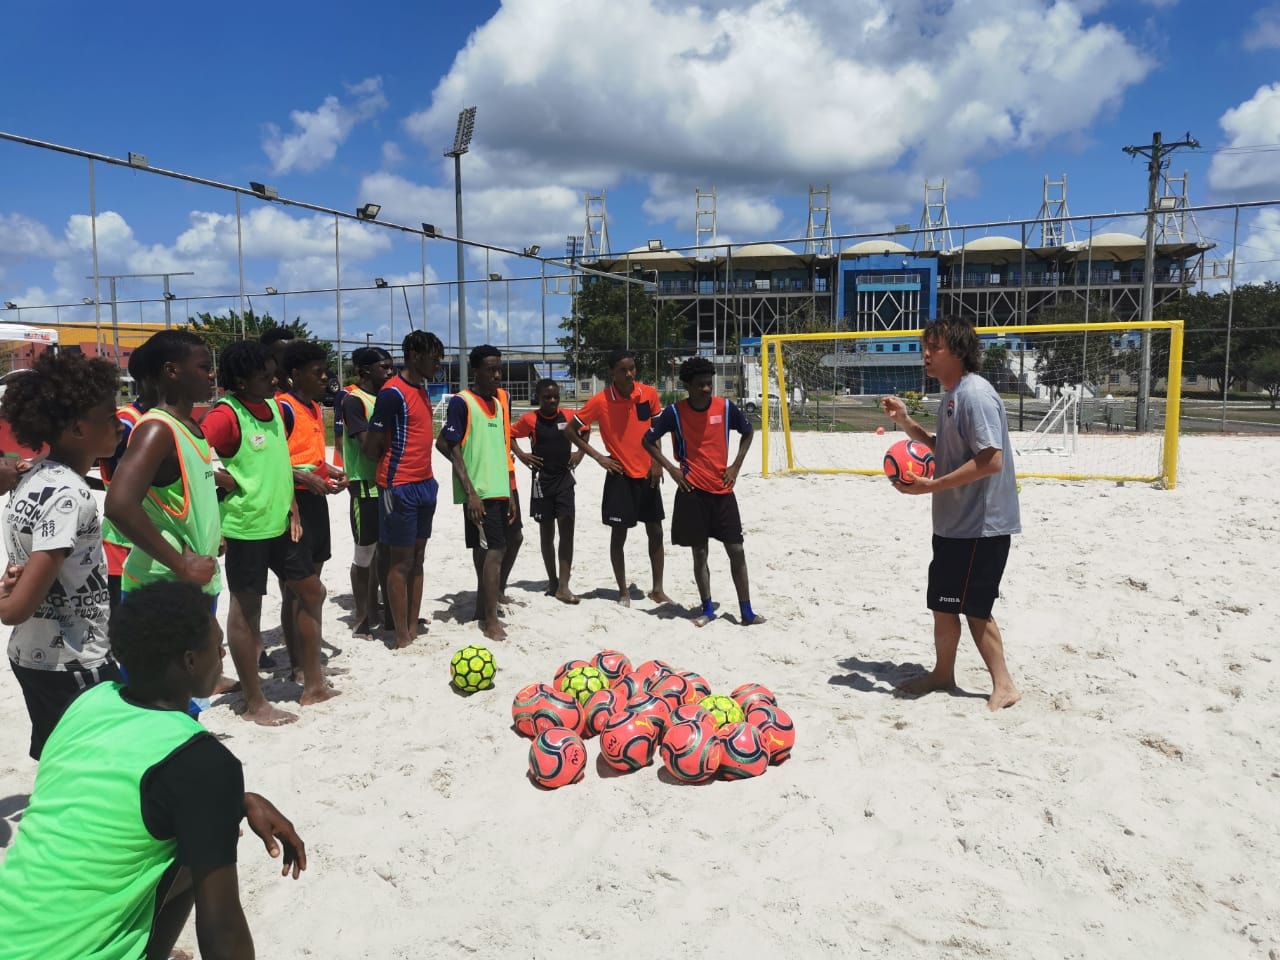 15 children treated to the fundamentals in Beach Soccer